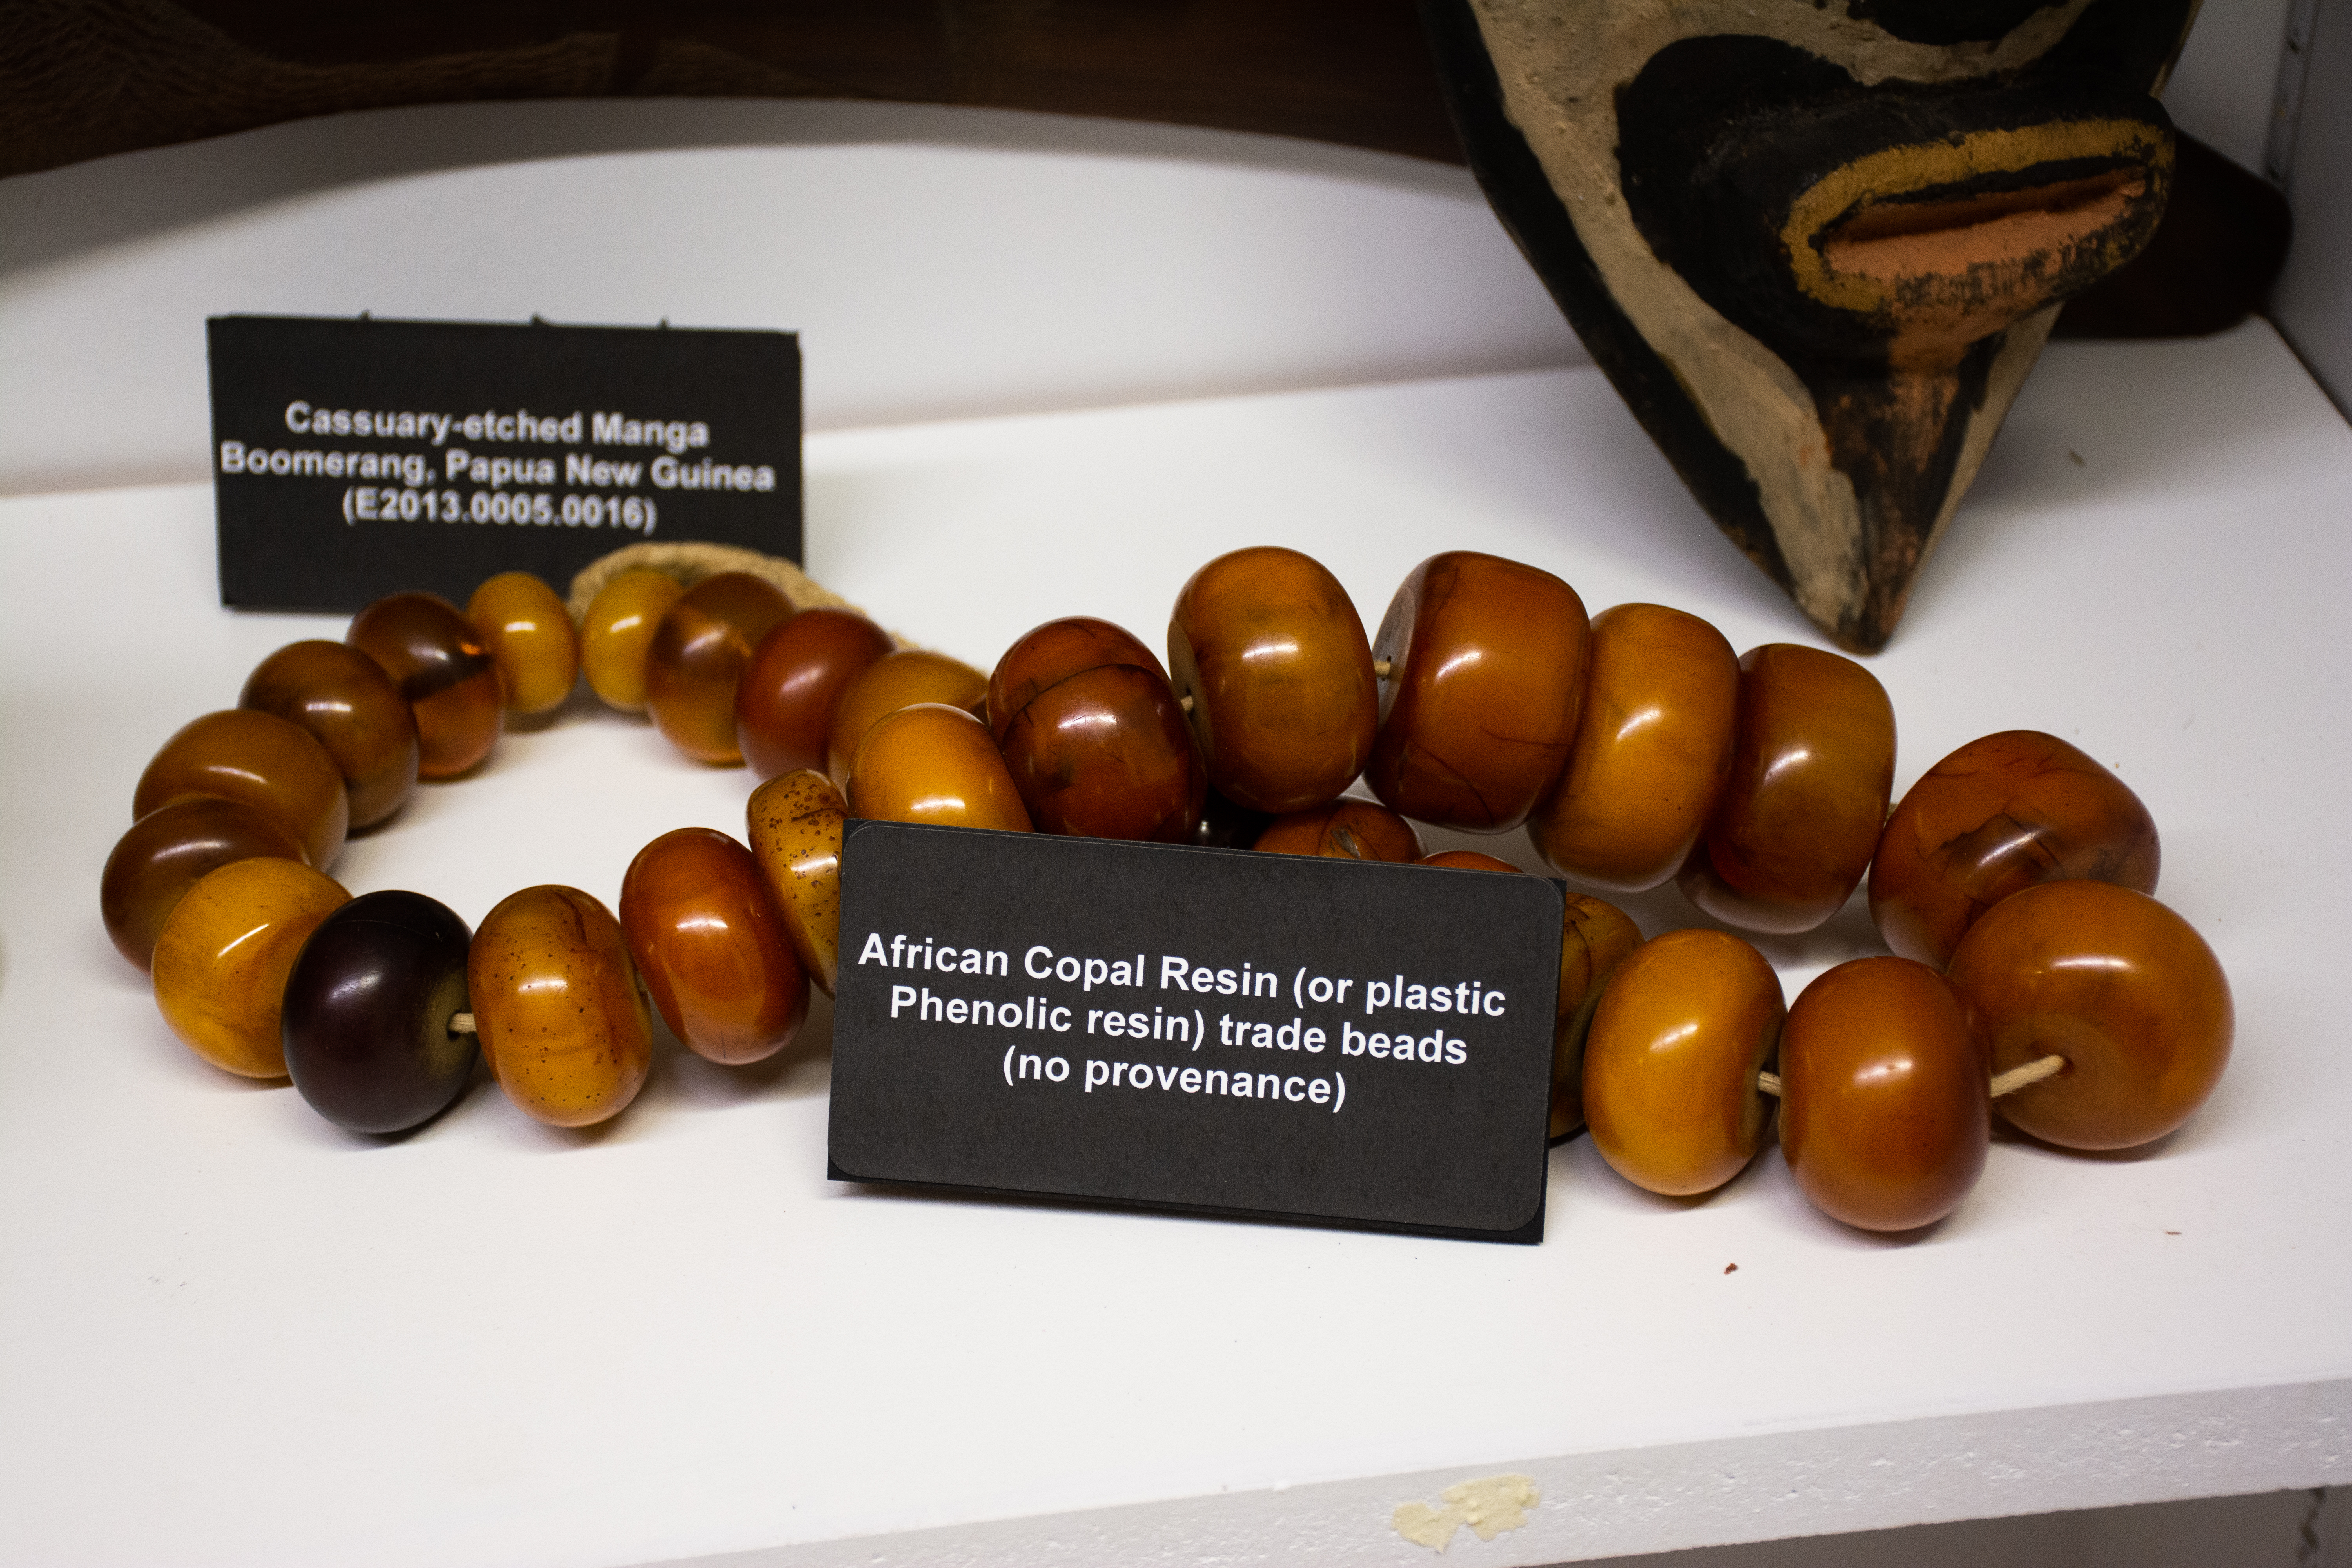 African Copal Resin(or plastic Phenolic resin) trade beads (no provenance)